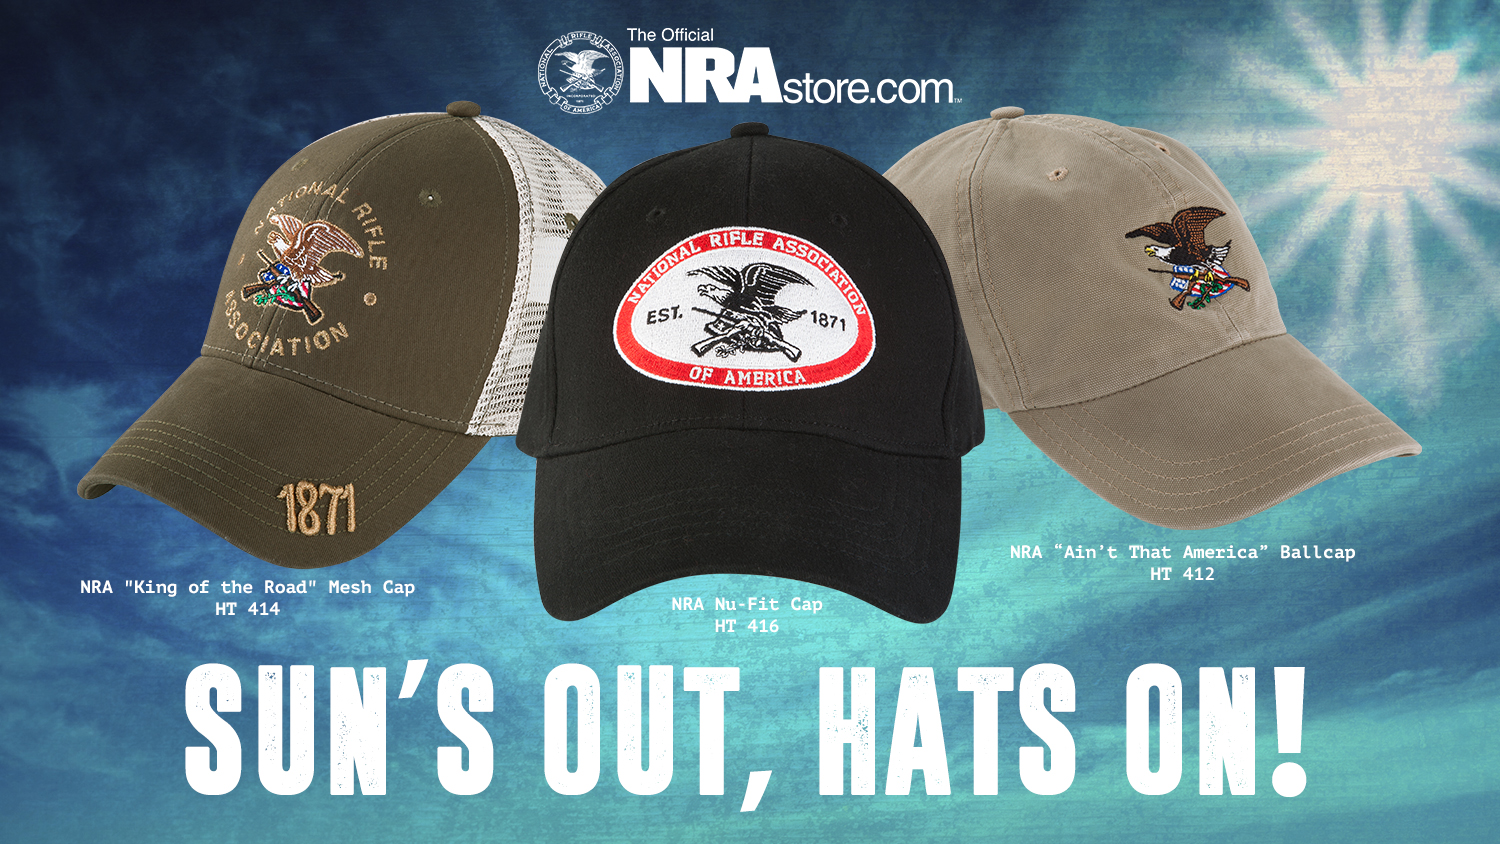 NRA Store Product Highlight: Second Amendment Hats